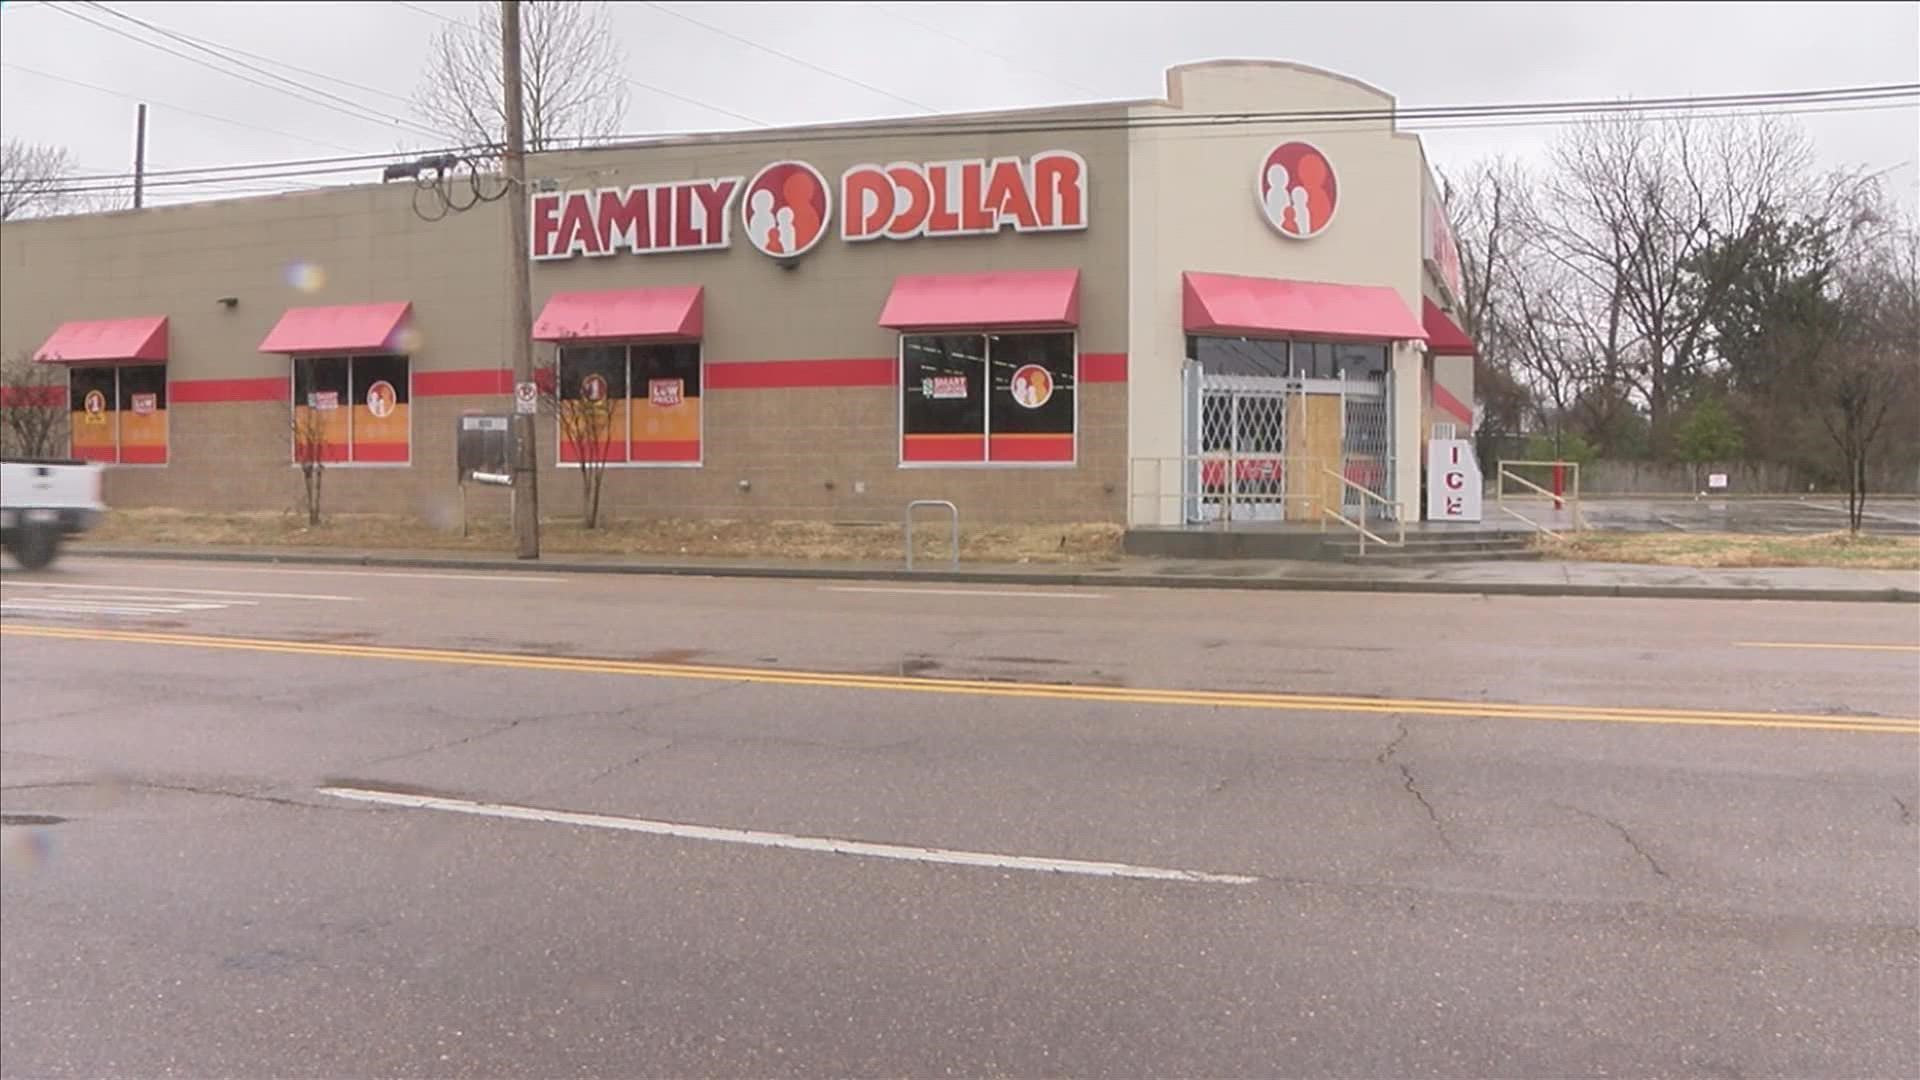 Indefinite closure of all Mid-South Family Dollar stores mean those in Memphis neighborhoods without full grocery stores have one less option for food, supplies.